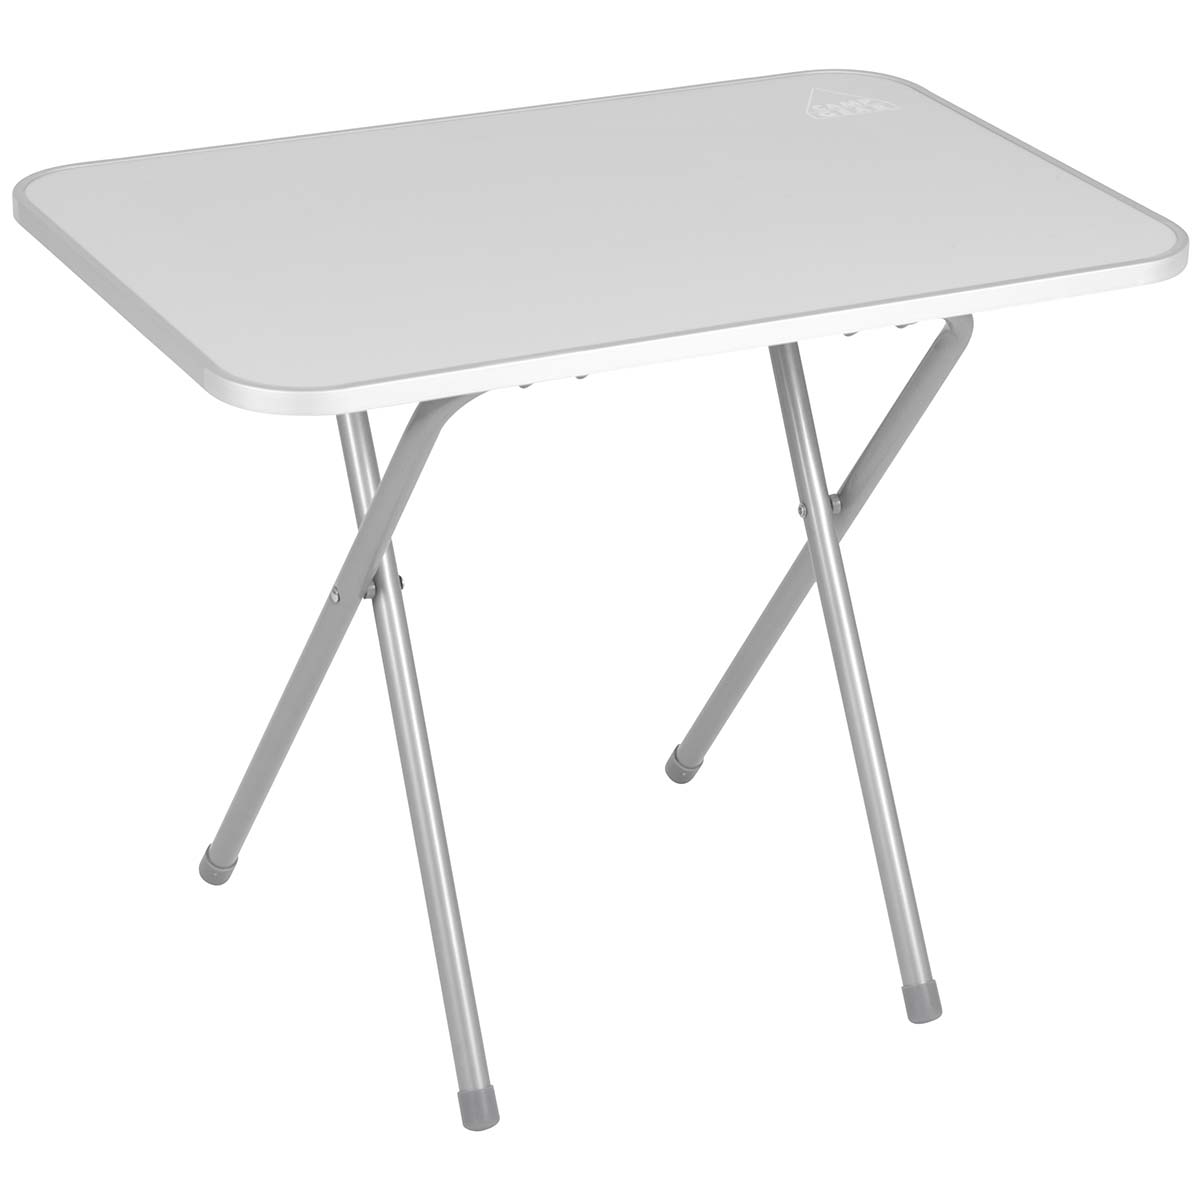 1405060 A folding table. This camping table has a steel frame and an MDF top. In addition, the table top is virtually water-resistant due to the sealed edges and the aluminium buffer edge. The table is simple to fold up.